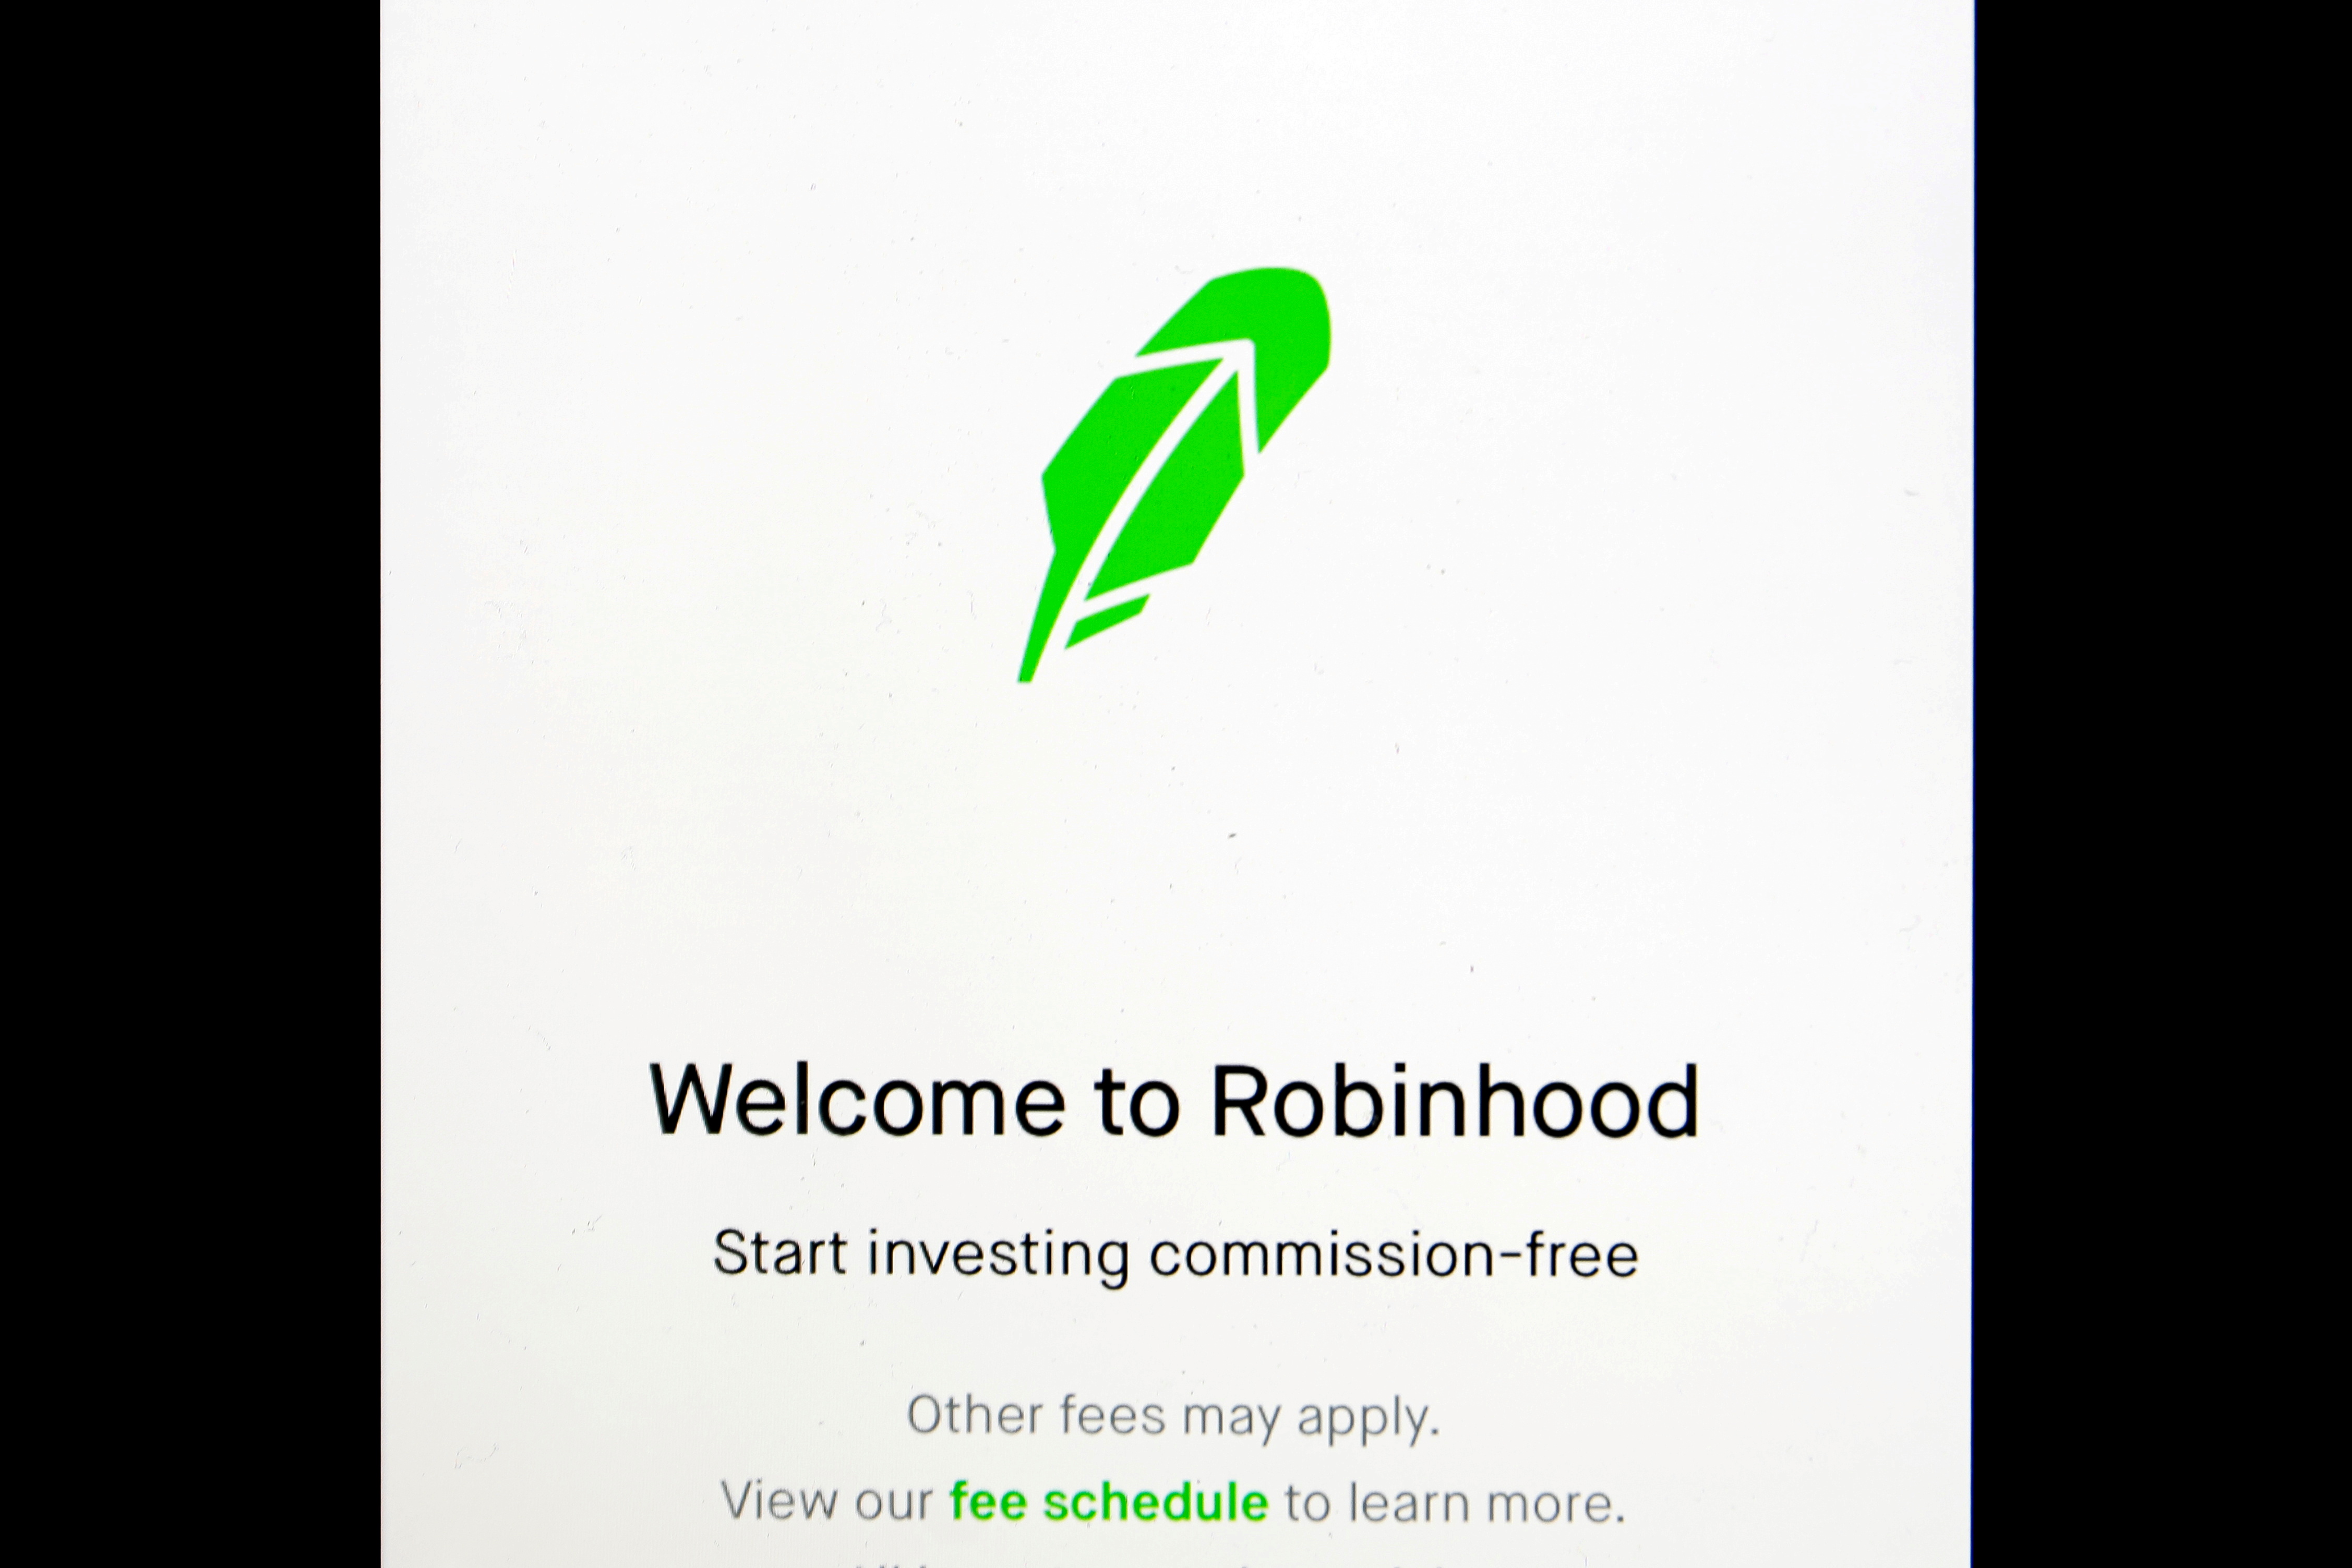 The welcome screen for the Robinhood App is displayed on a screen